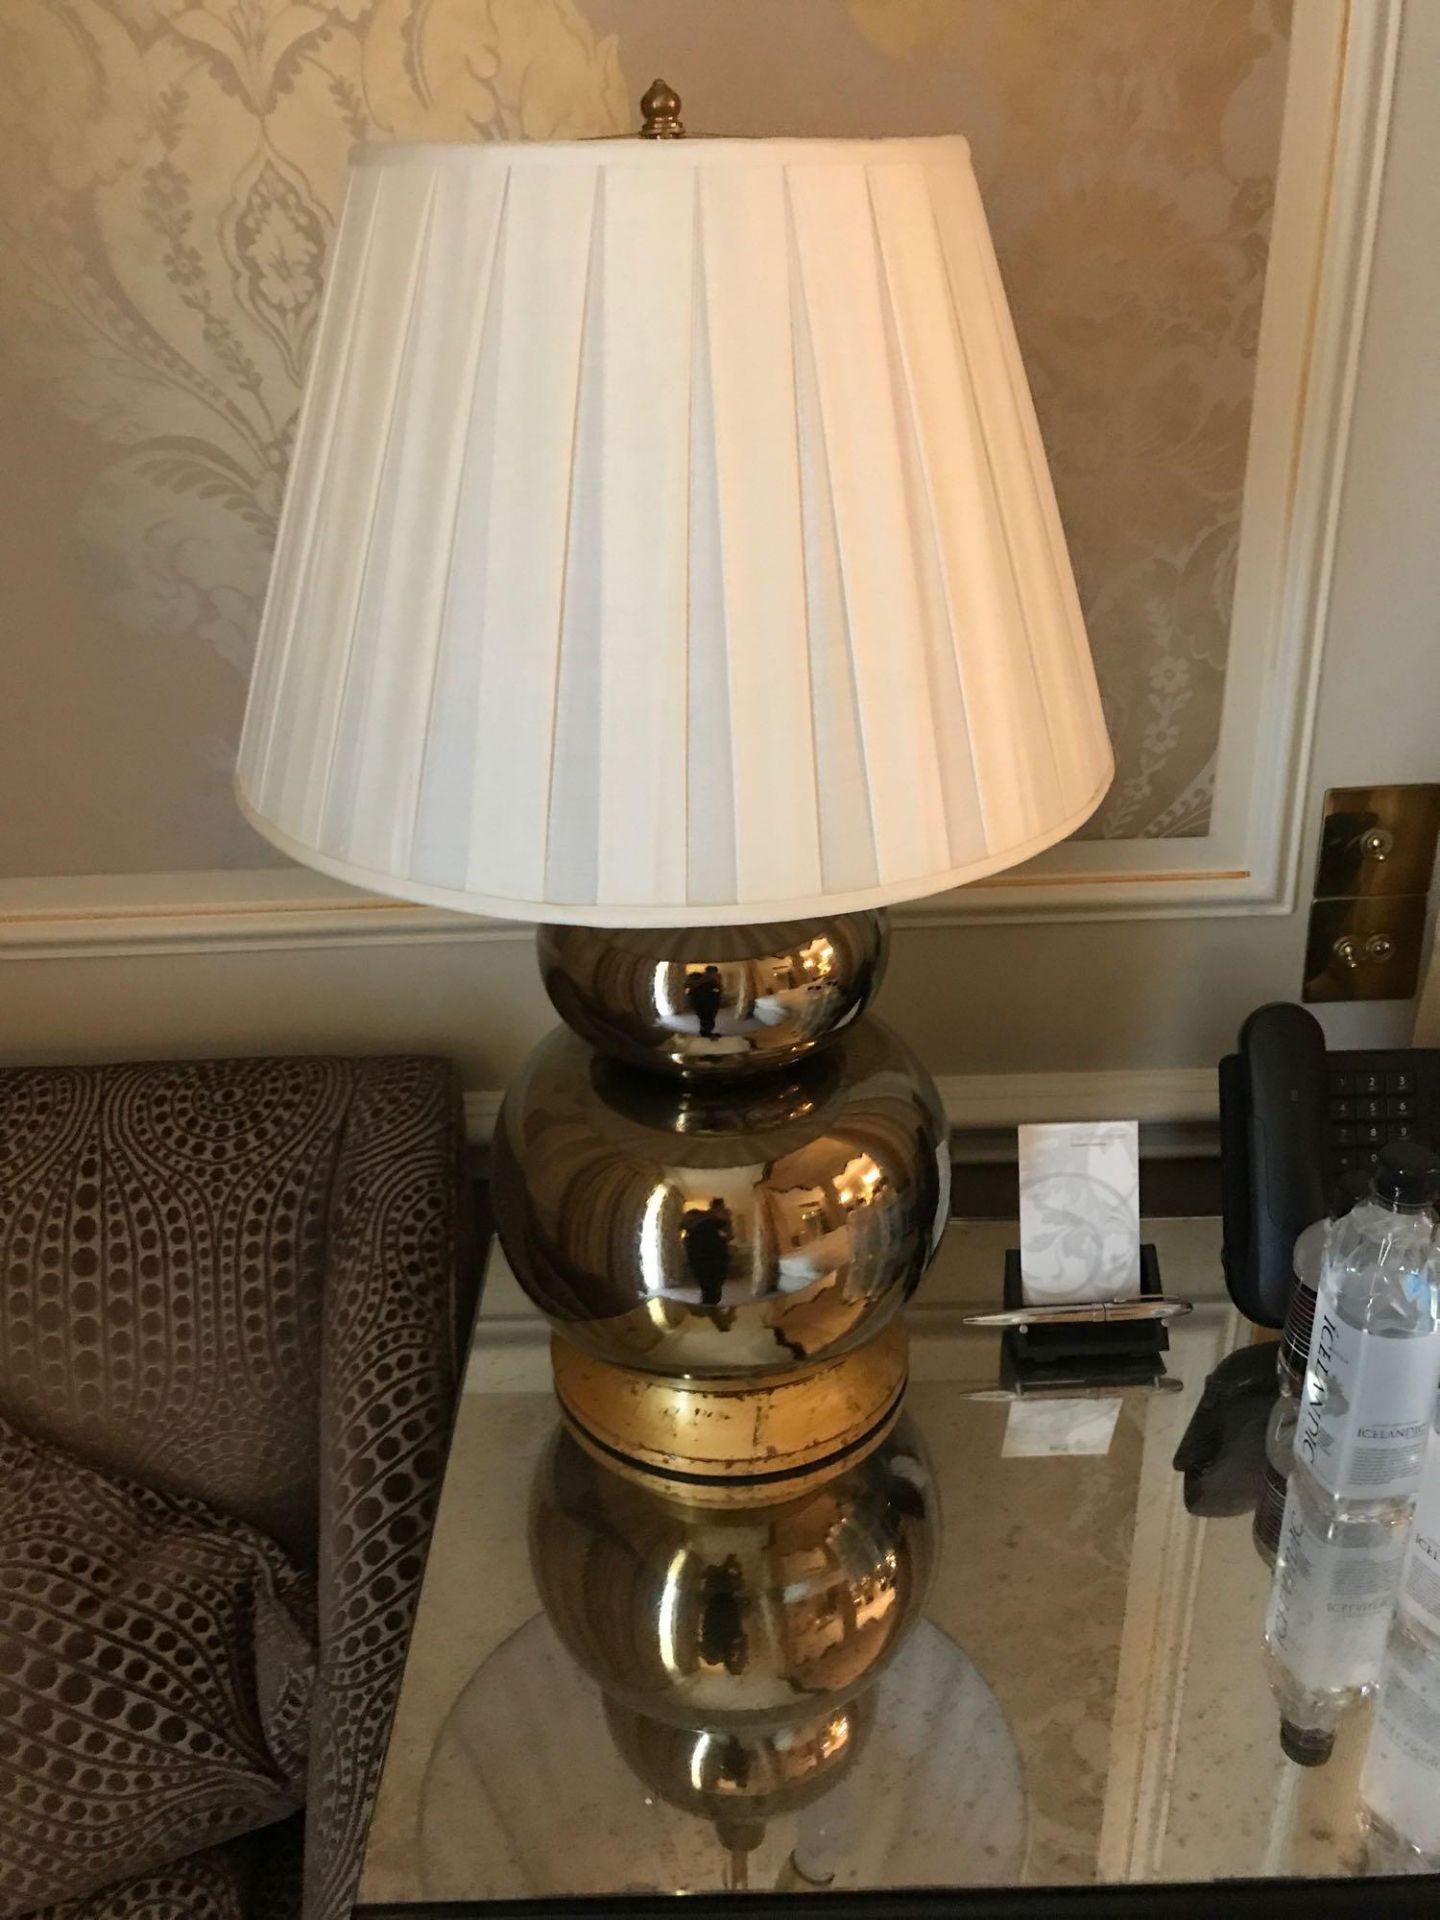 A Pair Of Heathfield And Co Louisa Glazed Ceramic Table Lamp With Textured Shade 77cm Room 609